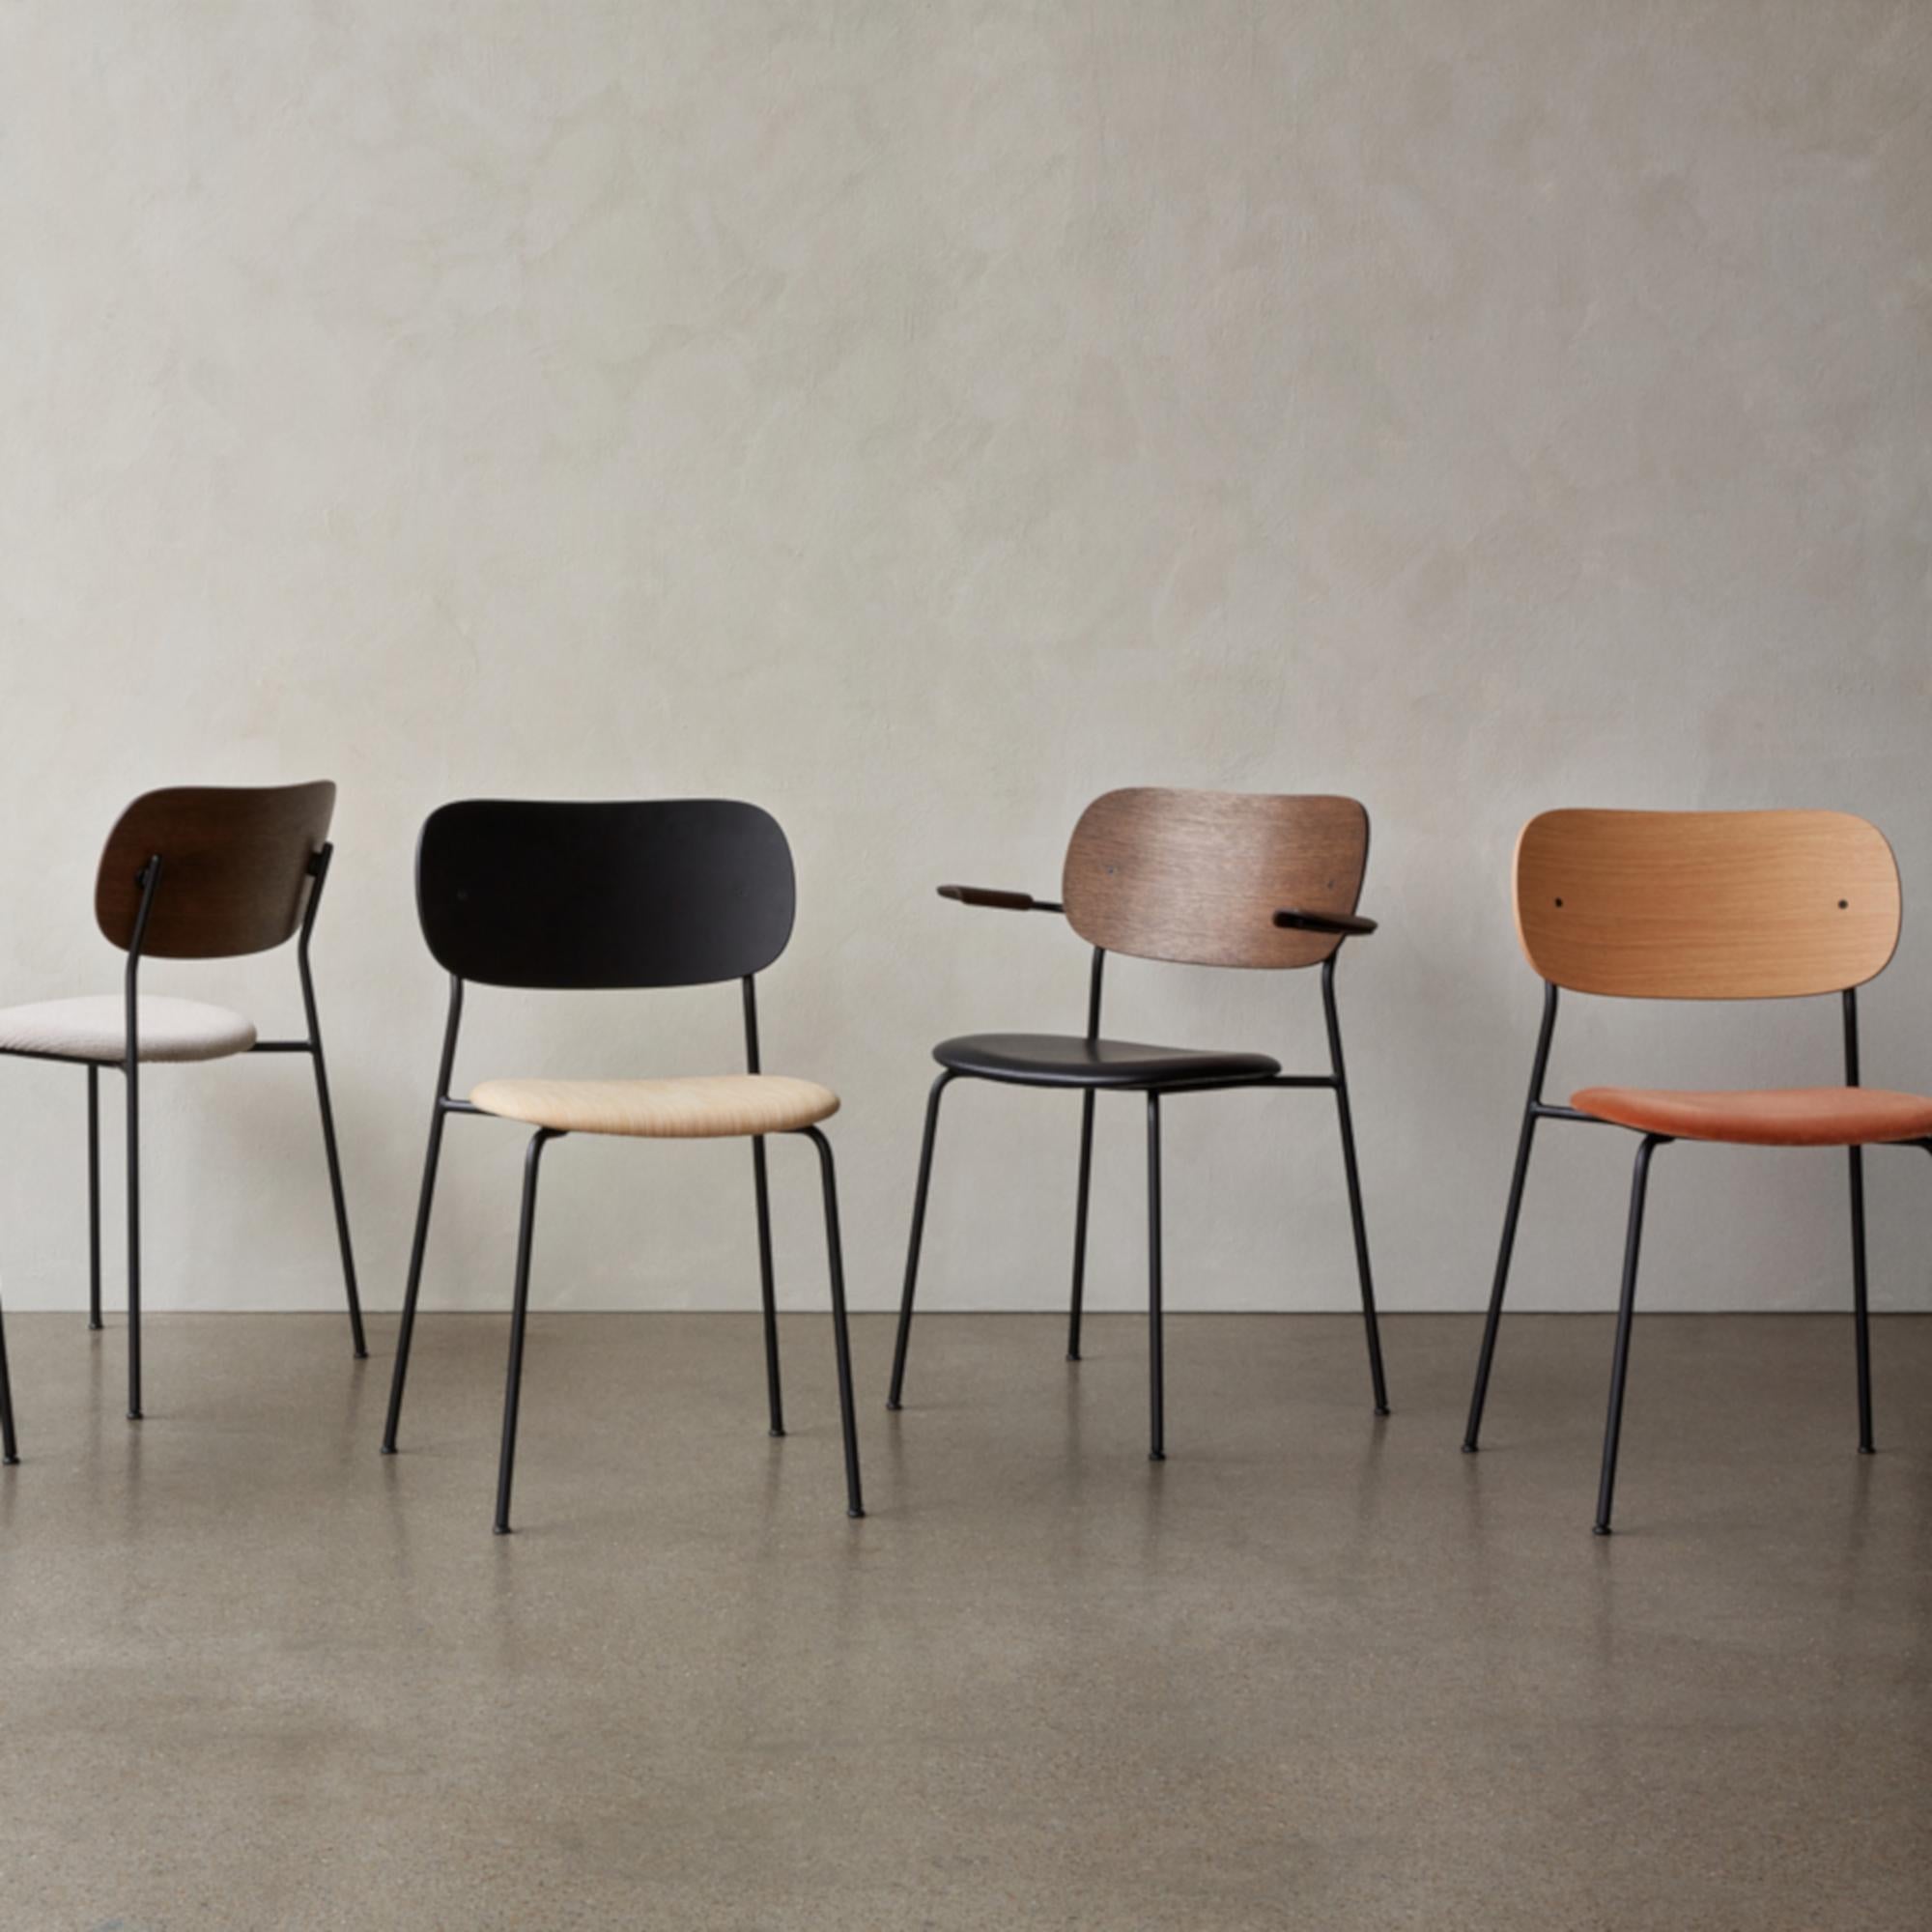 Together, mutually, in common: the words that define the prefix ‘co-’ are at the heart of our new Co Chair design. Conceived in collaboration with The Office Group and Norm Architects, the multi-functional chair adapts to a wide range of needs and